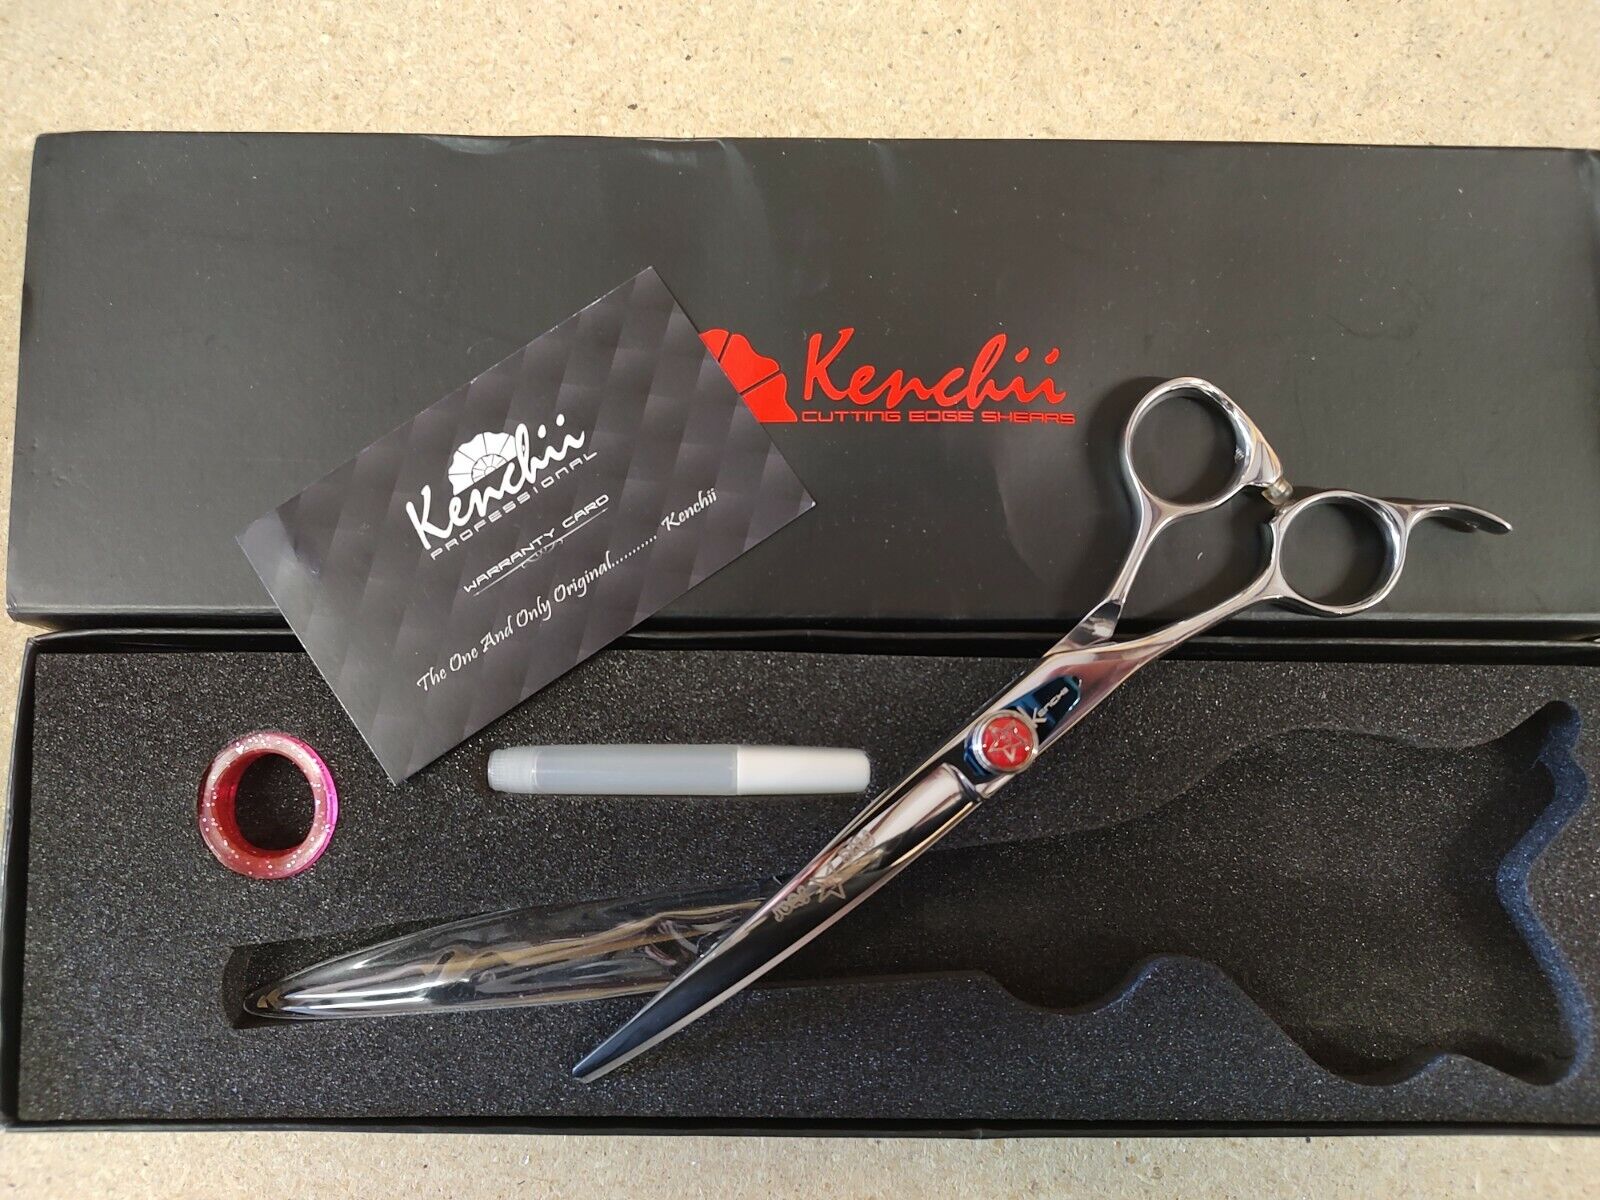 Kenchii Grooming Five Star 7" LEFTY Offset Curved Cuts Great Cutting Shear